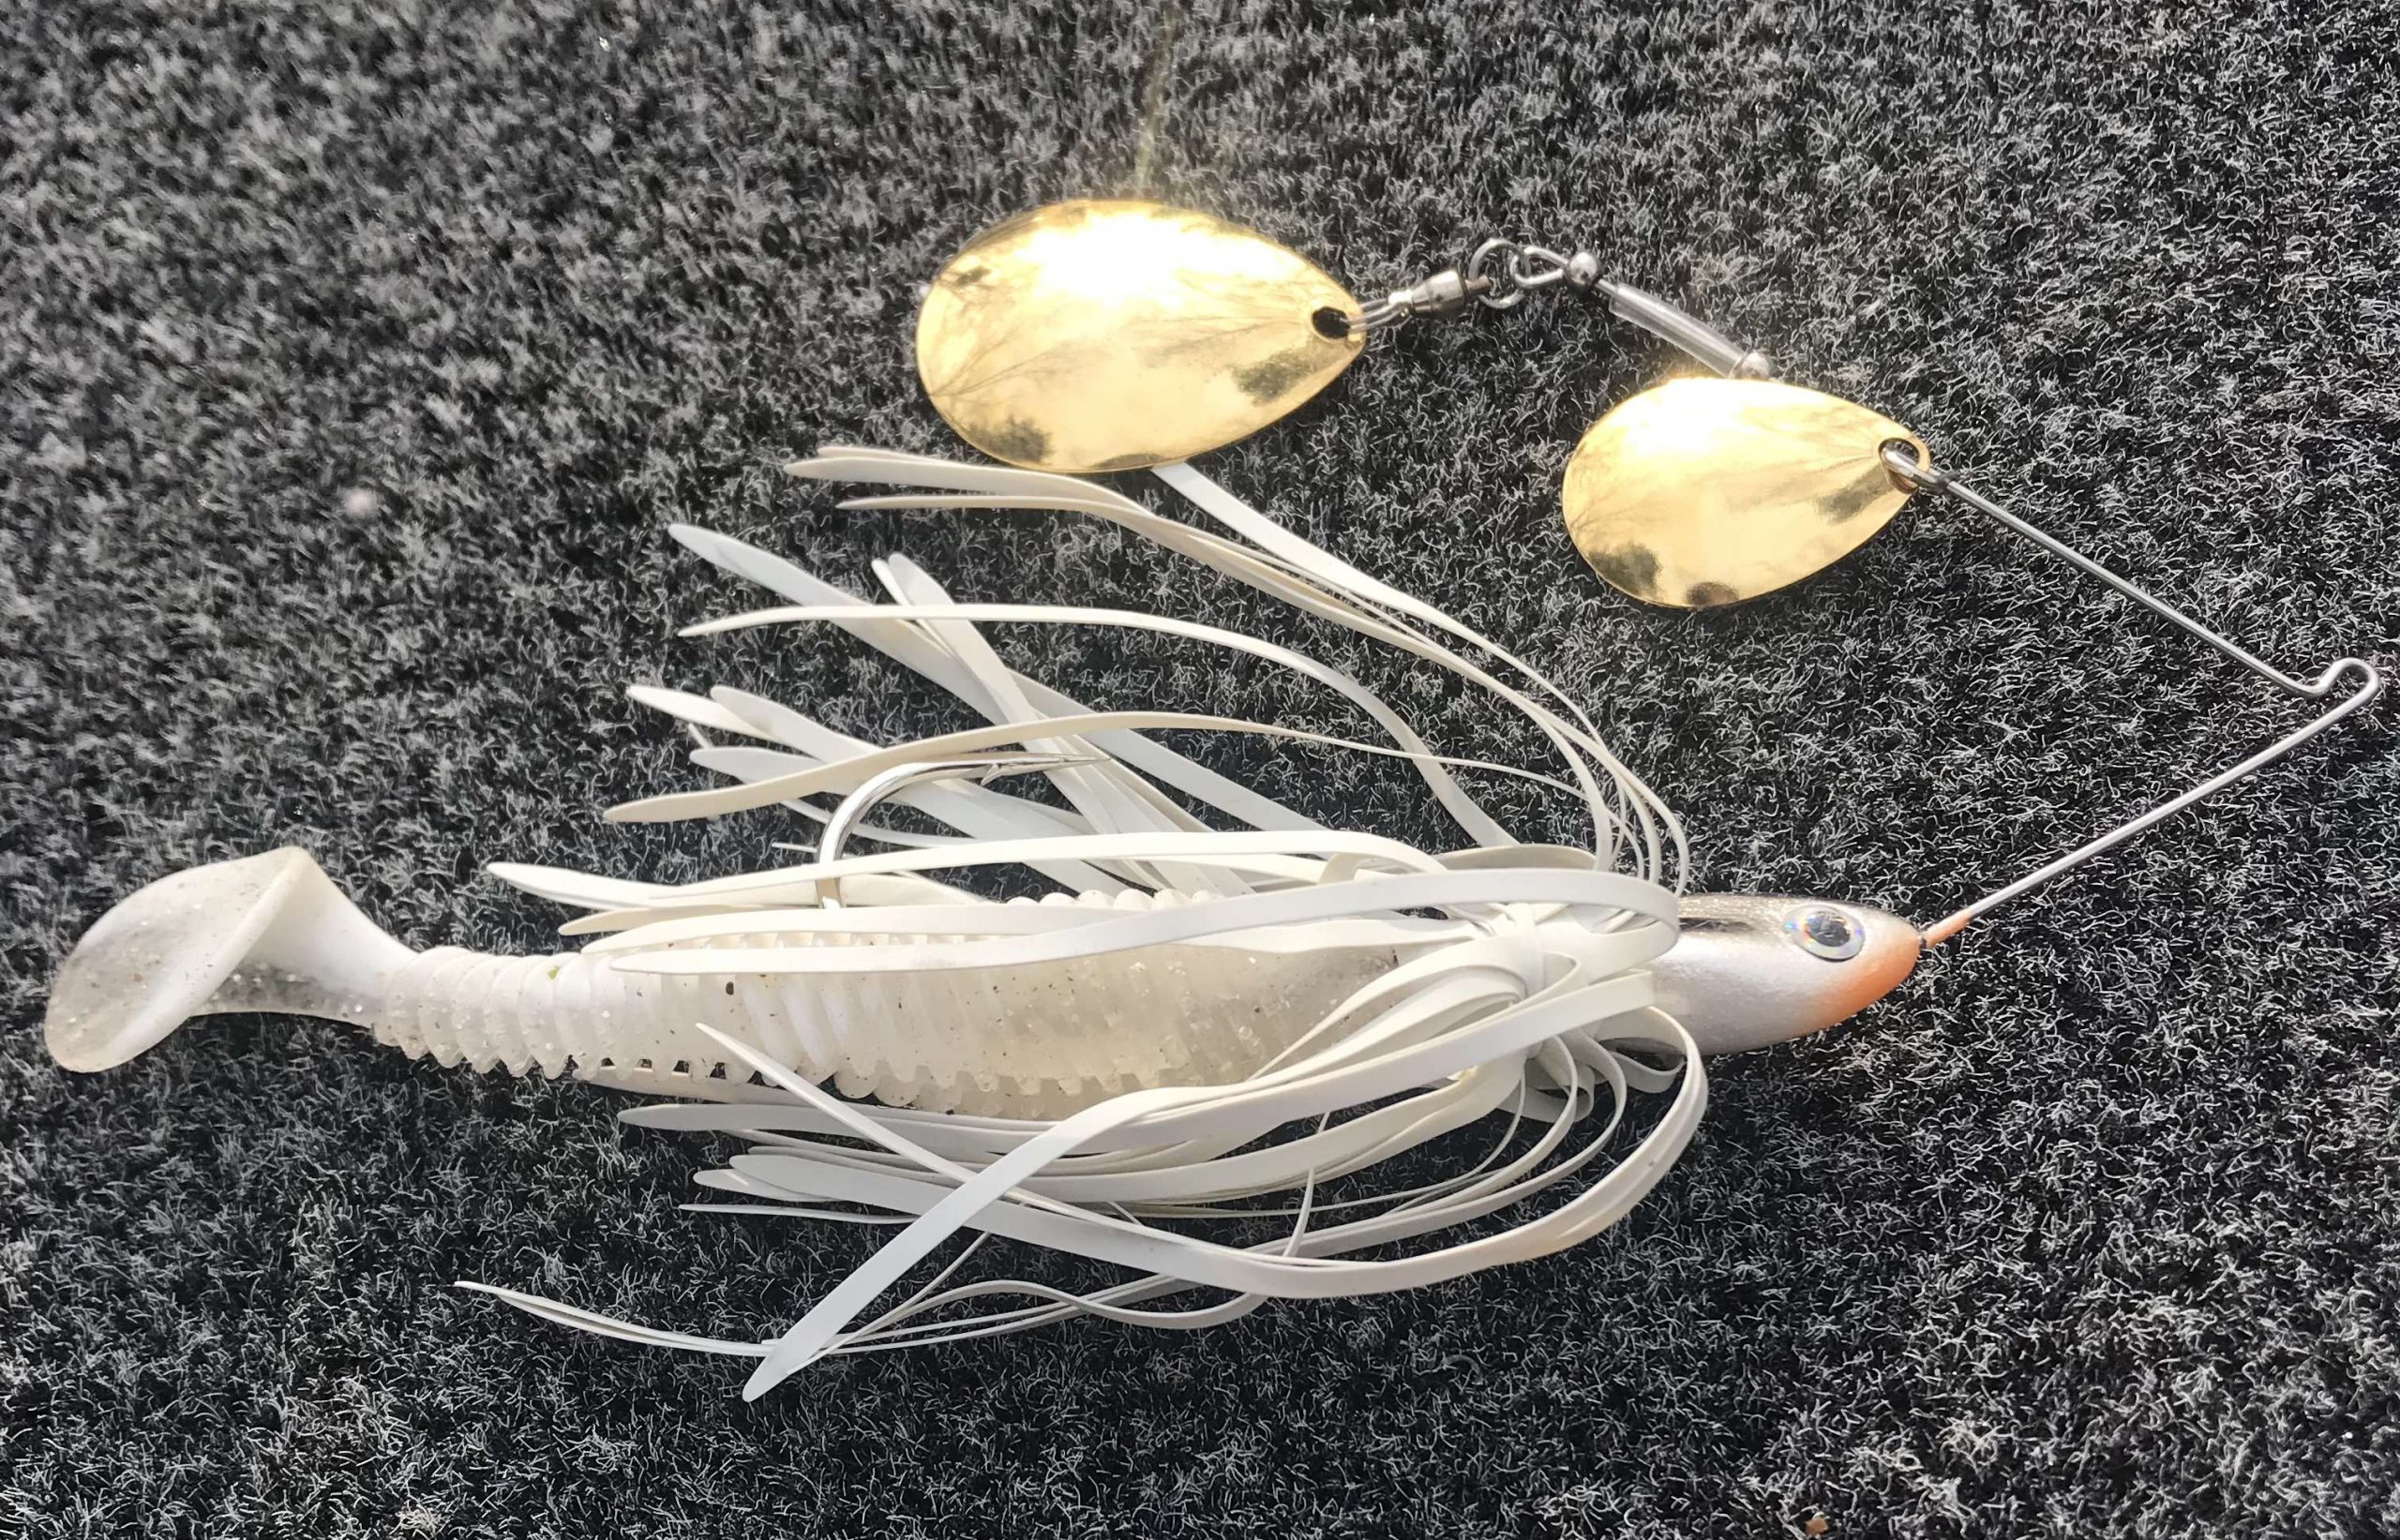 A 1/2-ounce Buckeye Lures Spinnerbait, double gold Colorado blades, with Googan Baits Saucy Swimmer, was the key lure of the Classic for Hamilton.